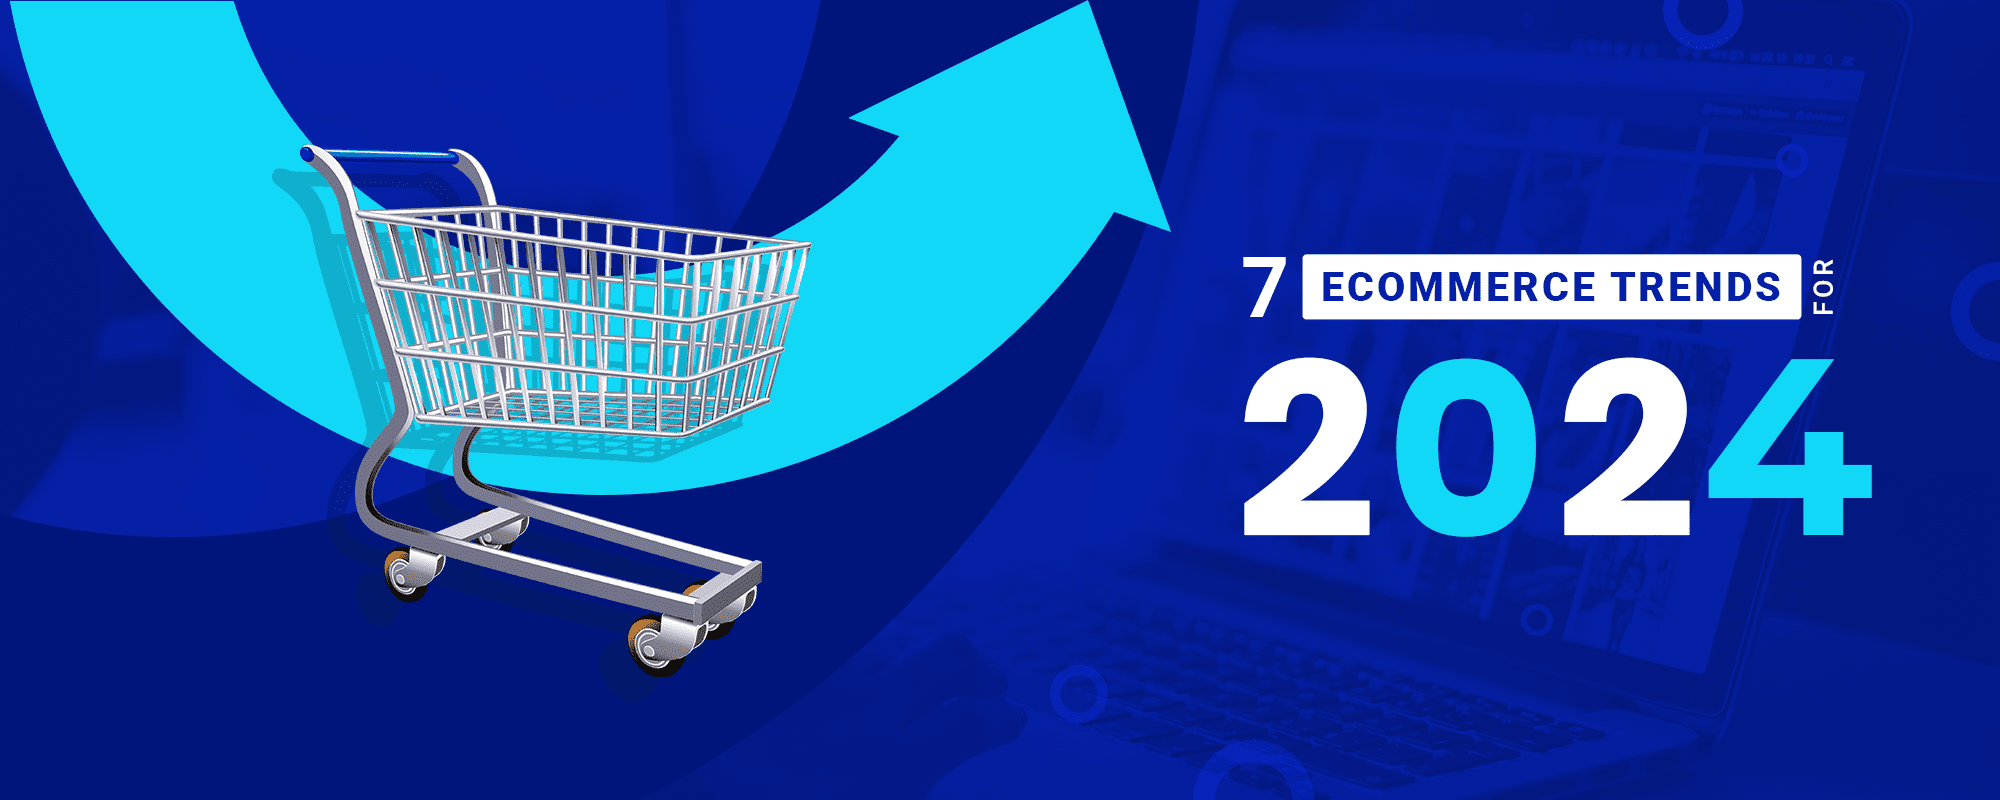 Top 7 Ecommerce Trends for 2024